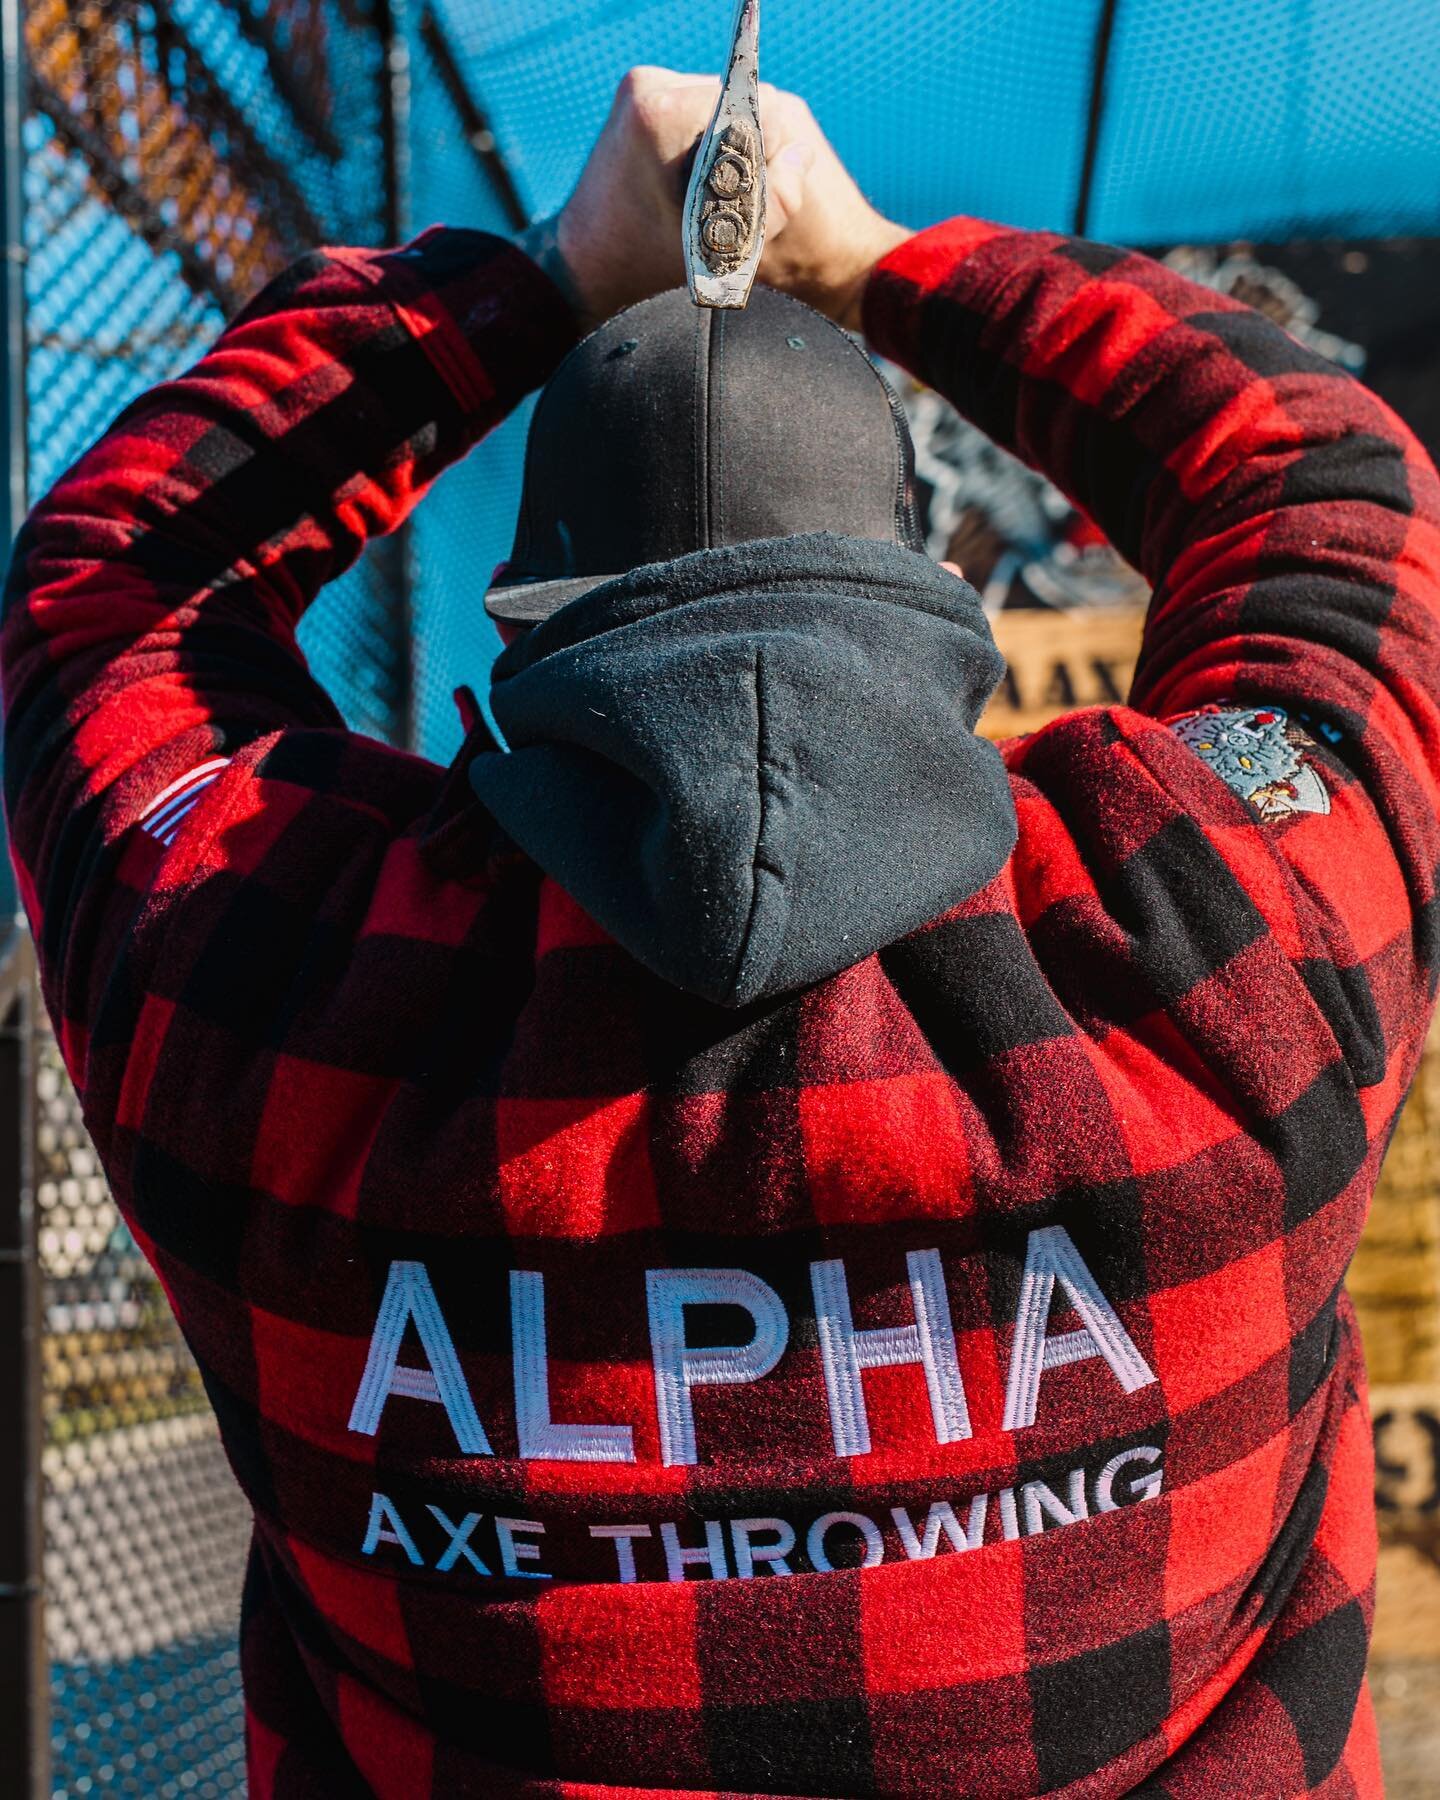 Going into the weekend like 🪓!
#alphaaxethrowing #swinging 

Lots of private events and birthday parties this weekend!! See you out there!!